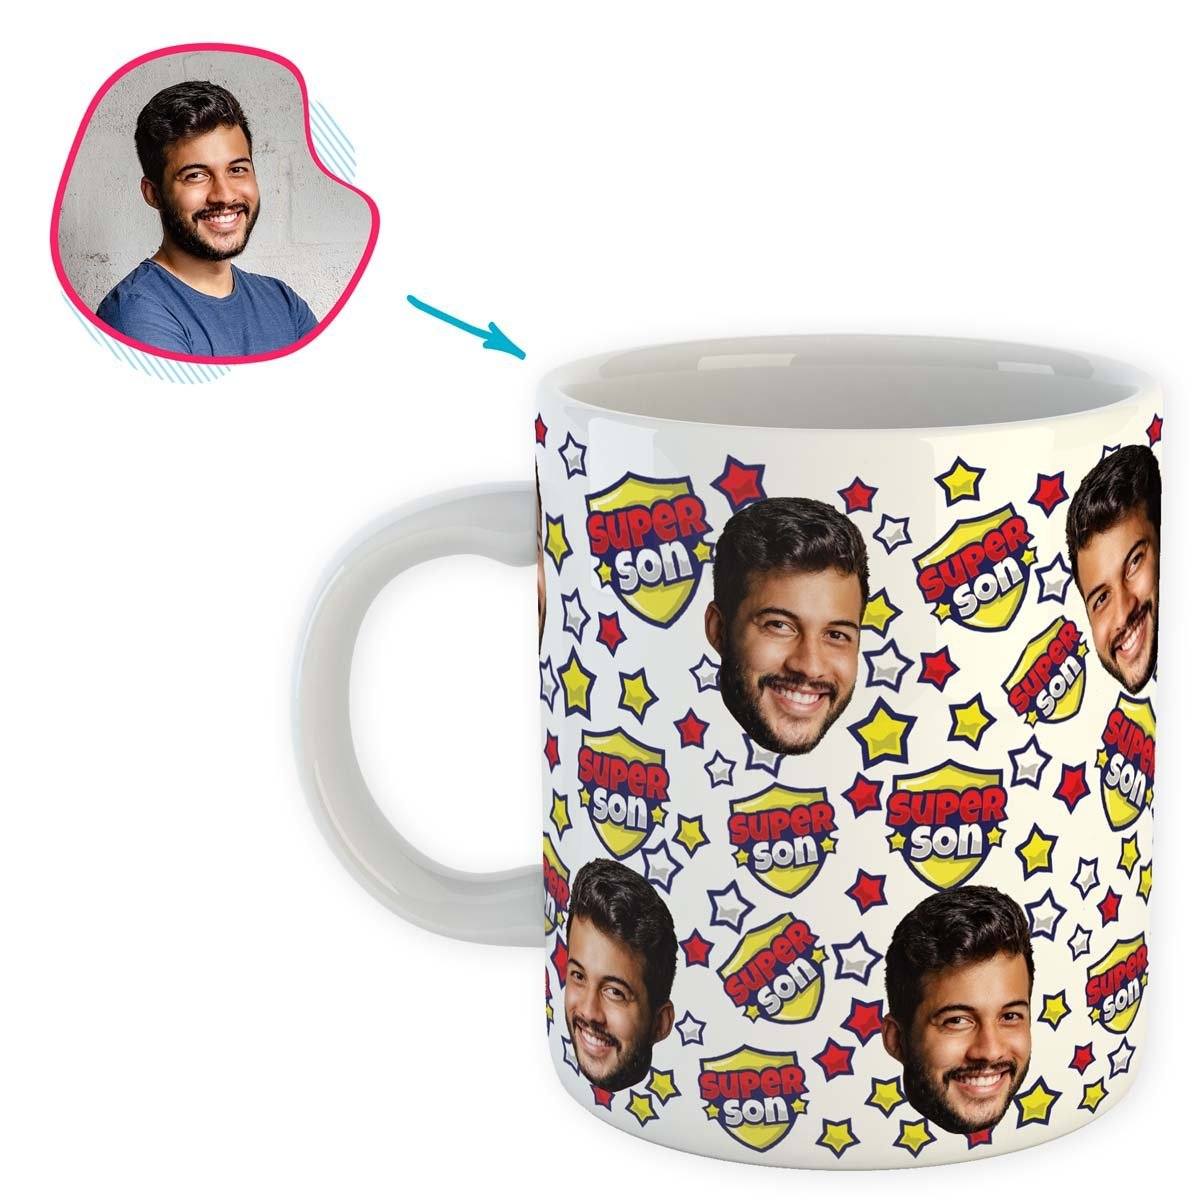 white Super Son mug personalized with photo of face printed on it